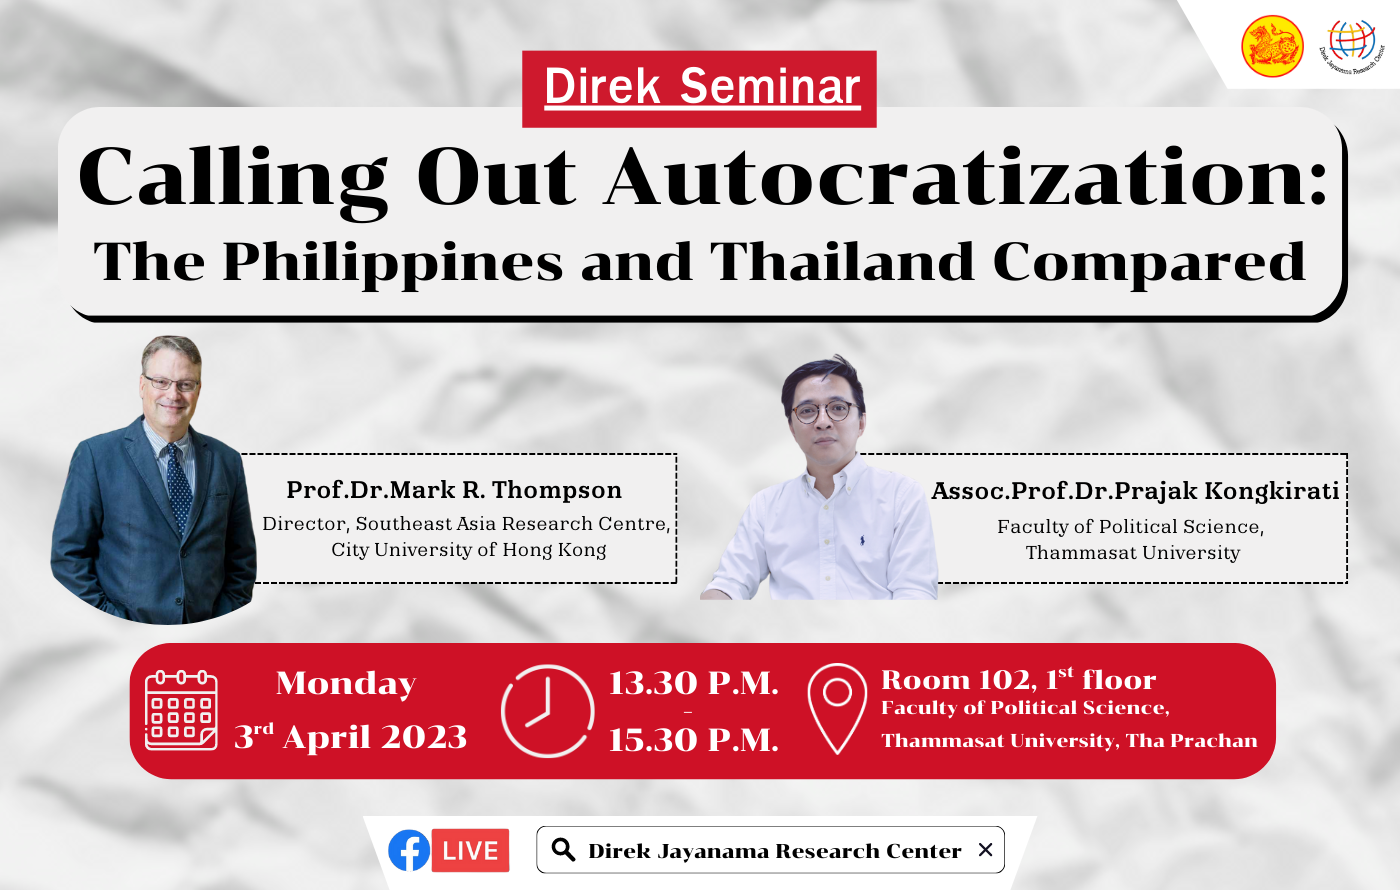 Direk Seminar “Calling Out Autocratization: The Philippines and Thailand Compared”